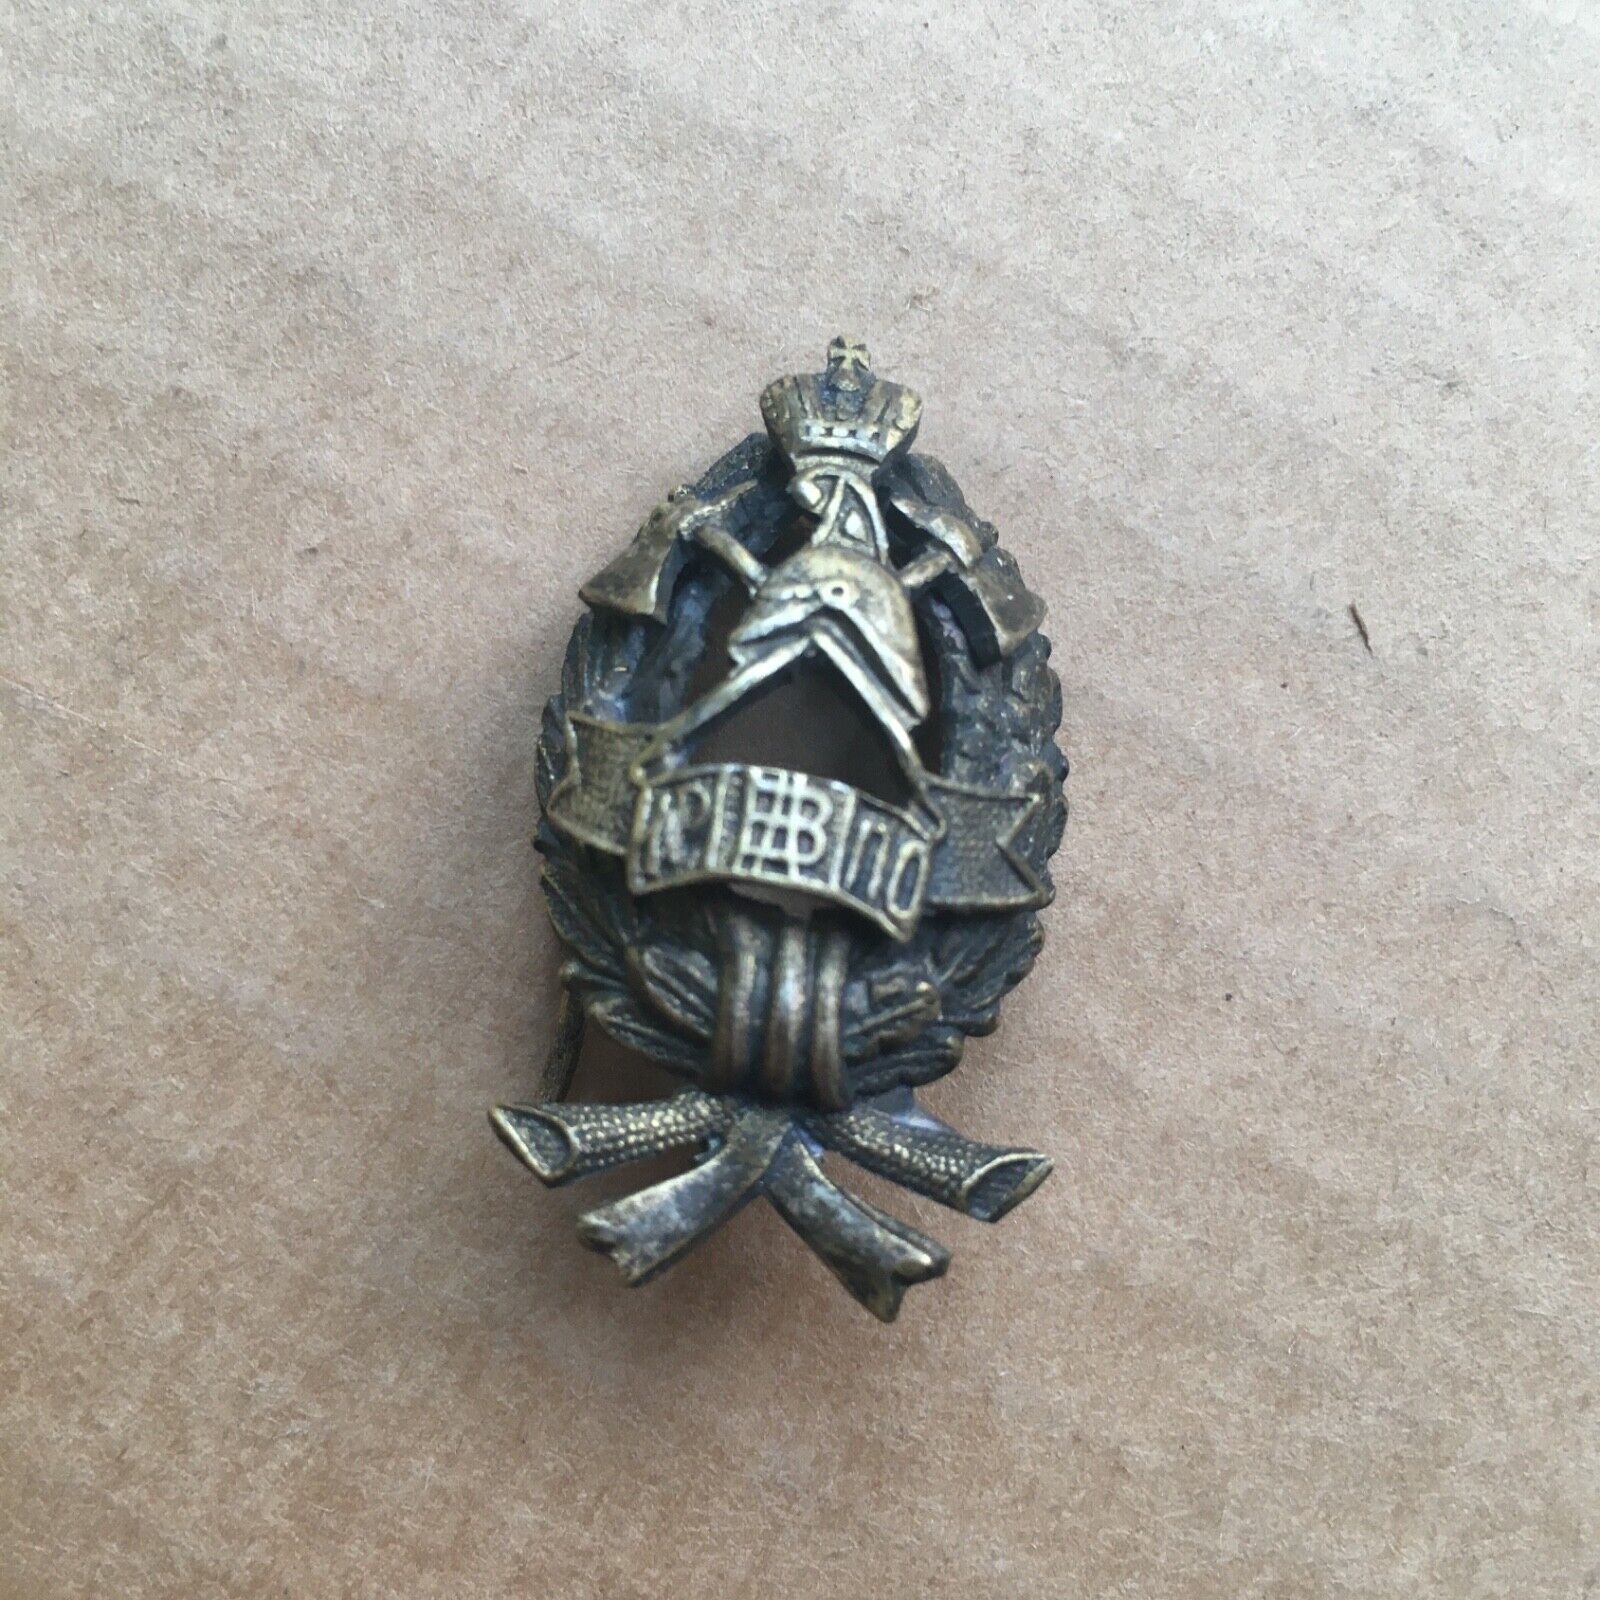 Orig. И.Р.П.О. (Russian Imperial Firefighter  Society) Firefighter Badge